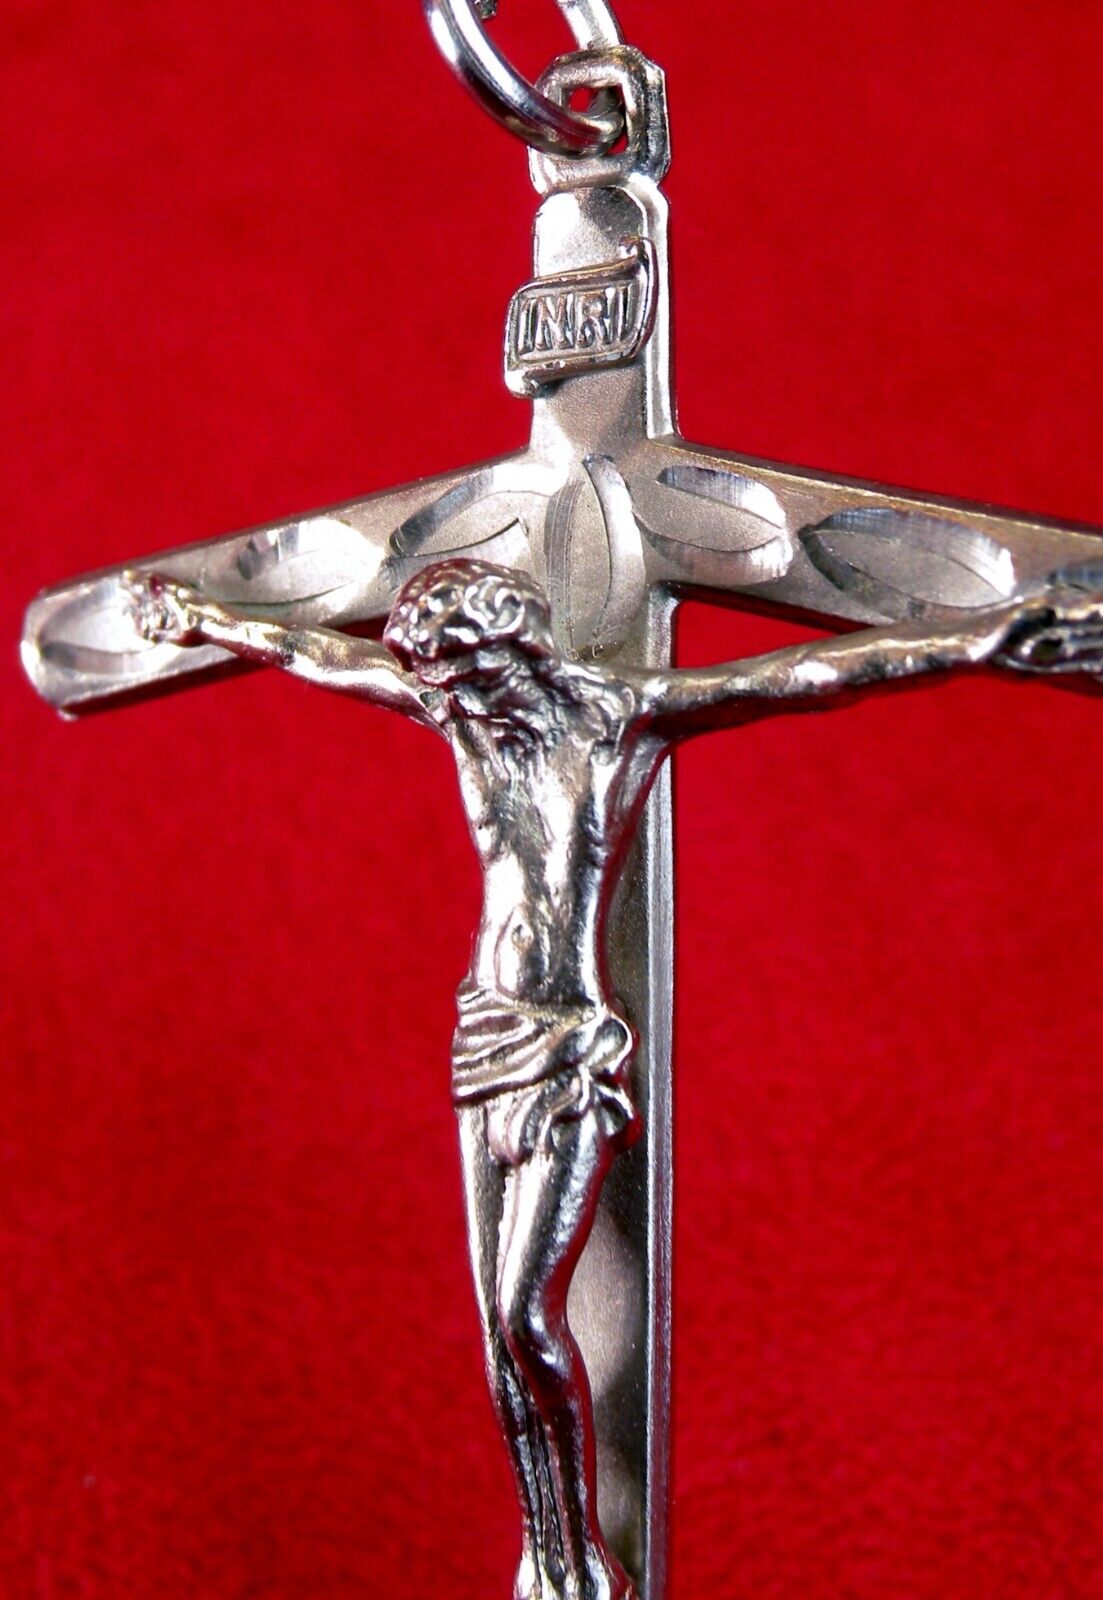 Nun's Vintage Pope Francis Crozier Staff Style Sterling Silver Cross Crucifix